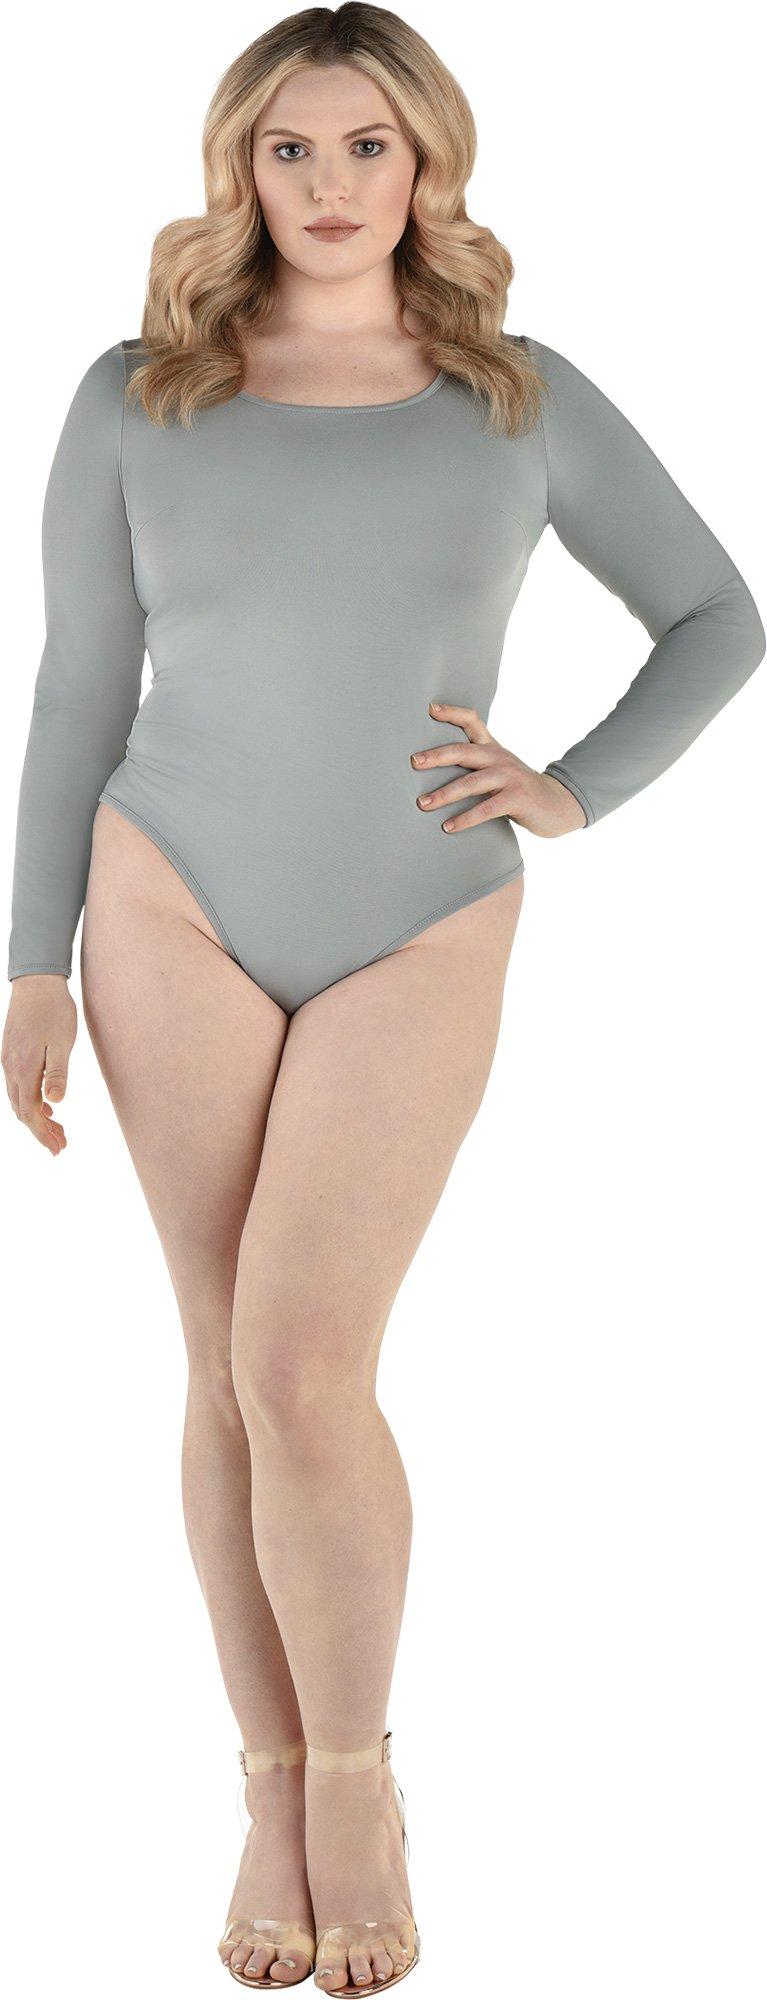 Grey Bodysuit (Adult S/M) - Comfortable, Stretchy & Premium Fabric -  Perfect for Parties, Dress-up, and Role-Playing